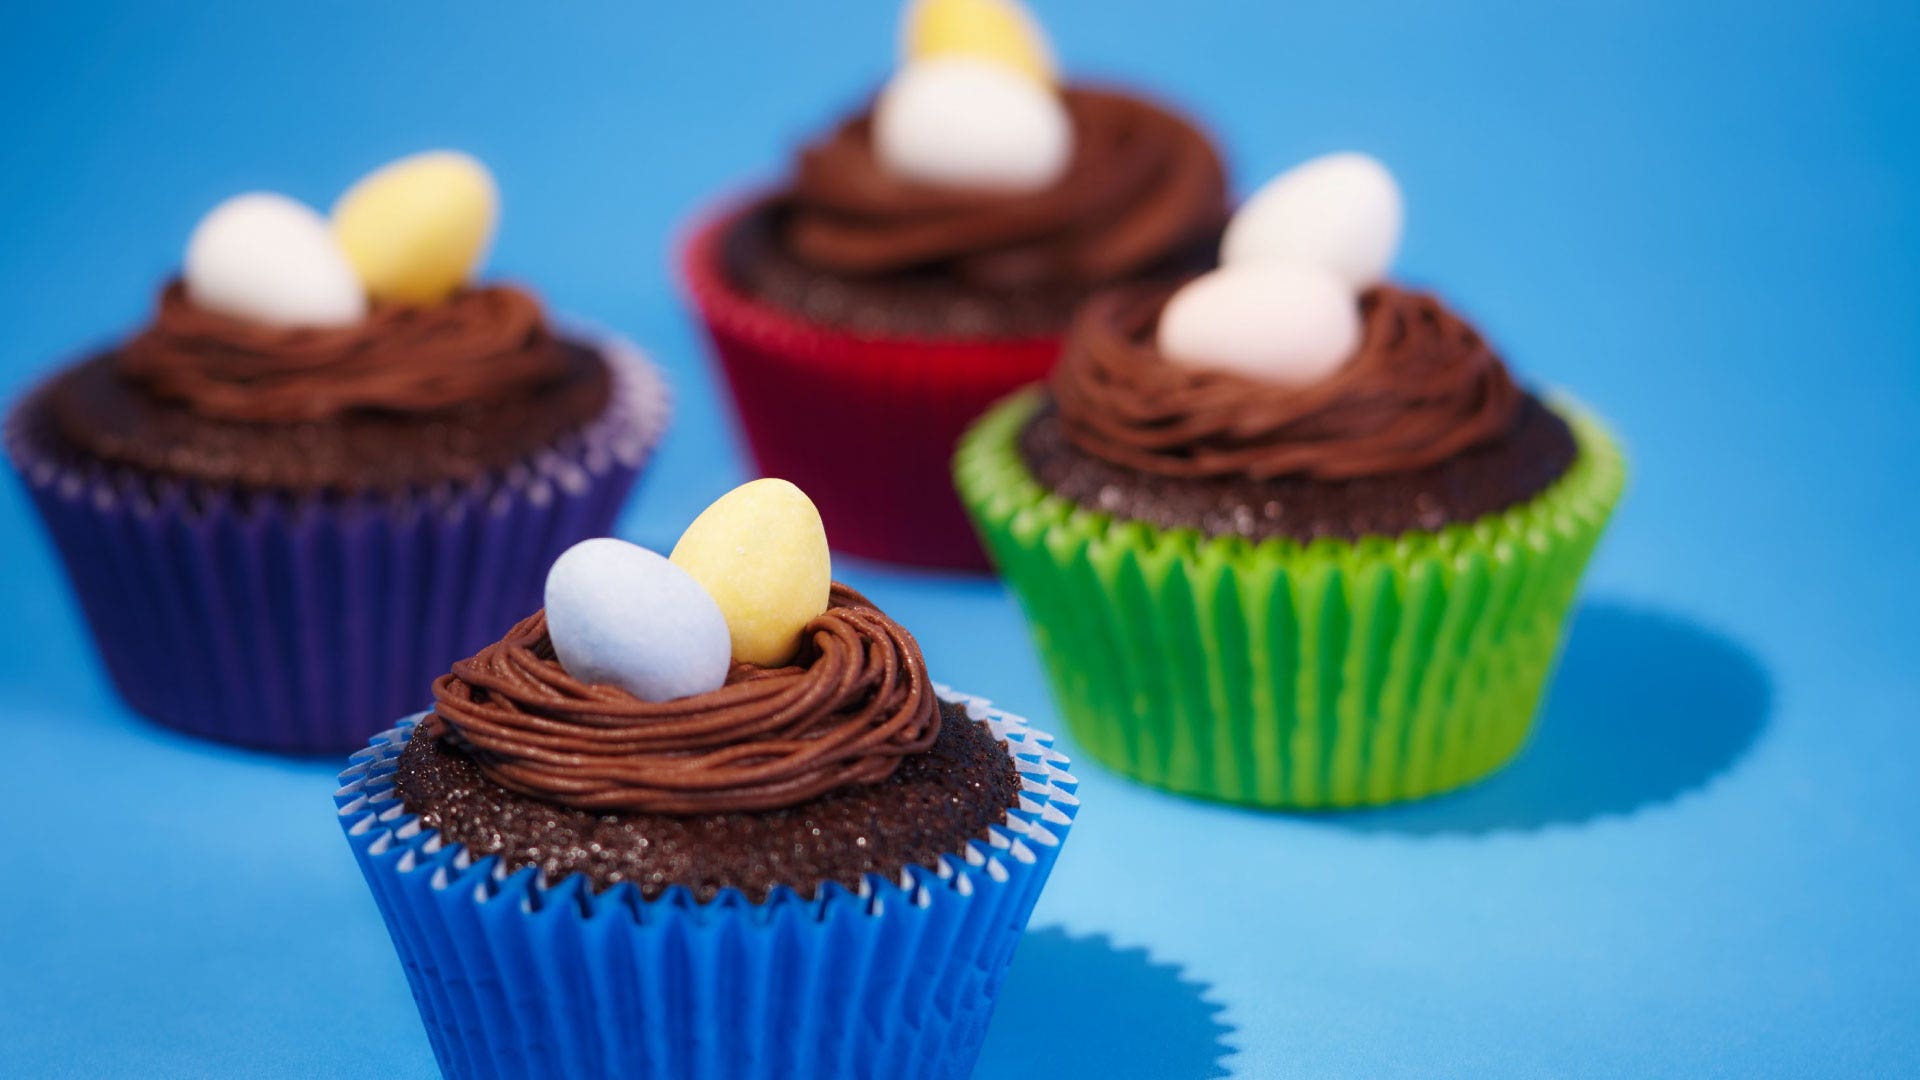 perfectly chocolate chocolate cupcakes easter theme